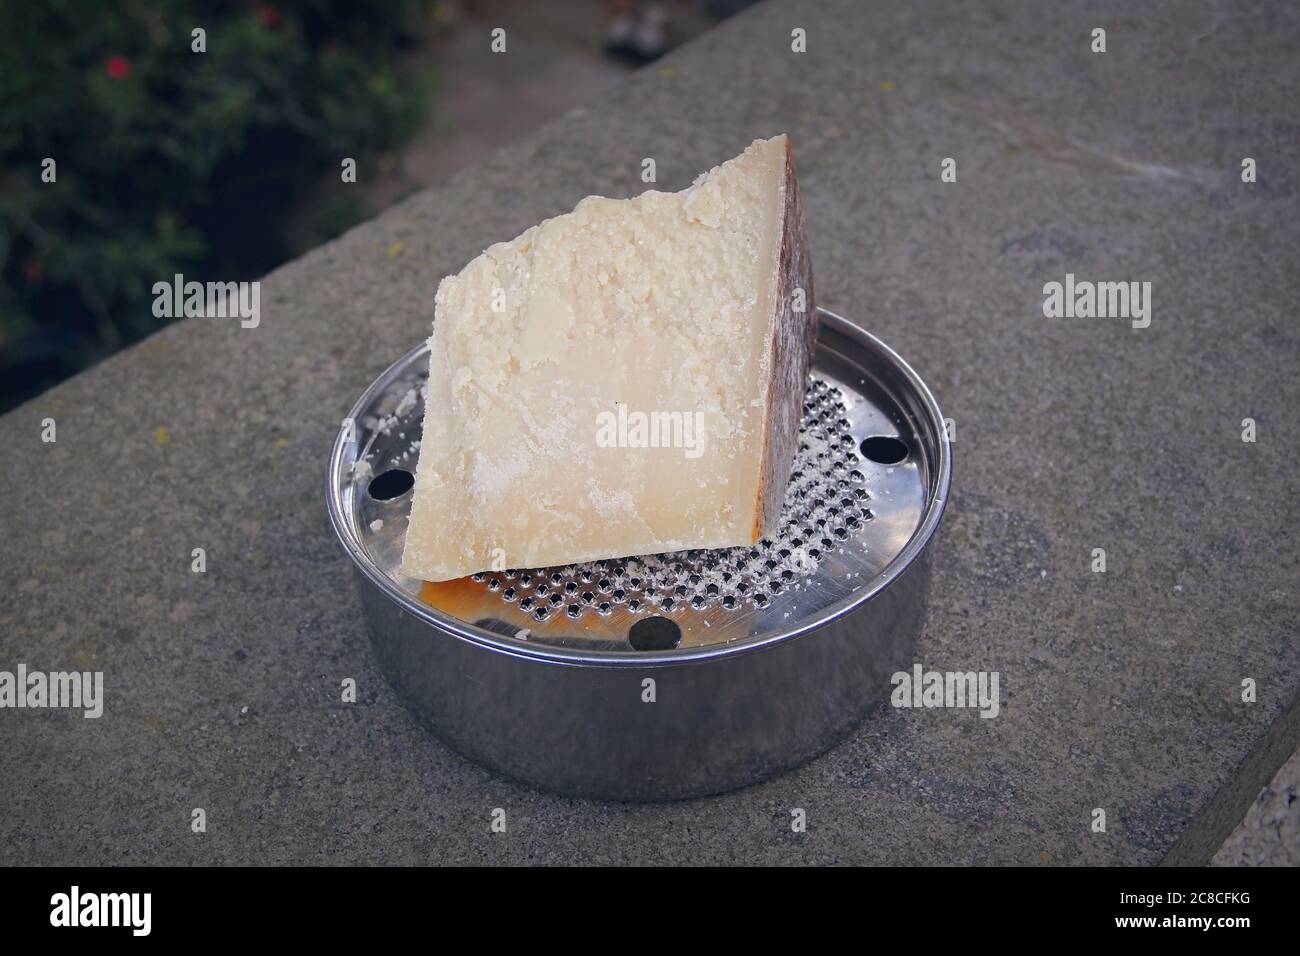 https://c8.alamy.com/comp/2C8CFKG/a-chunk-of-parmesan-cheese-on-a-typical-italian-grater-called-ratta-2C8CFKG.jpg